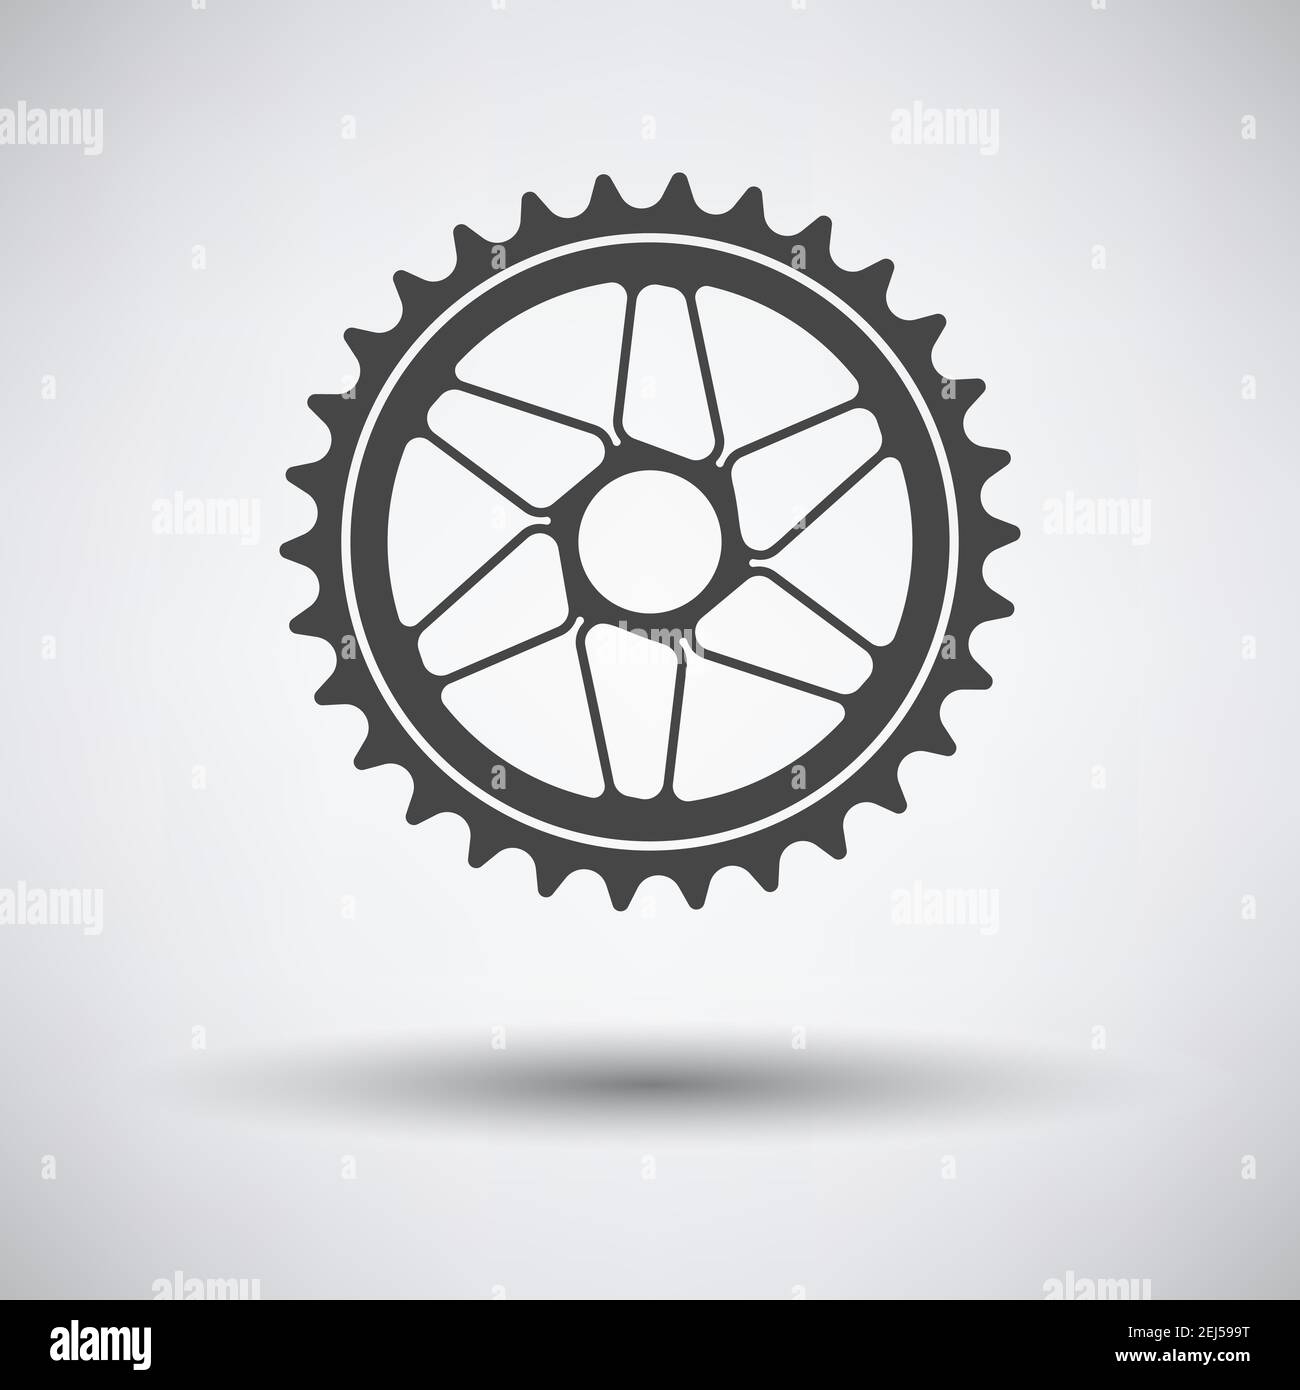 Bike Gear Star Icon. Dark Gray on Gray Background With Round Shadow. Vector Illustration. Stock Vector